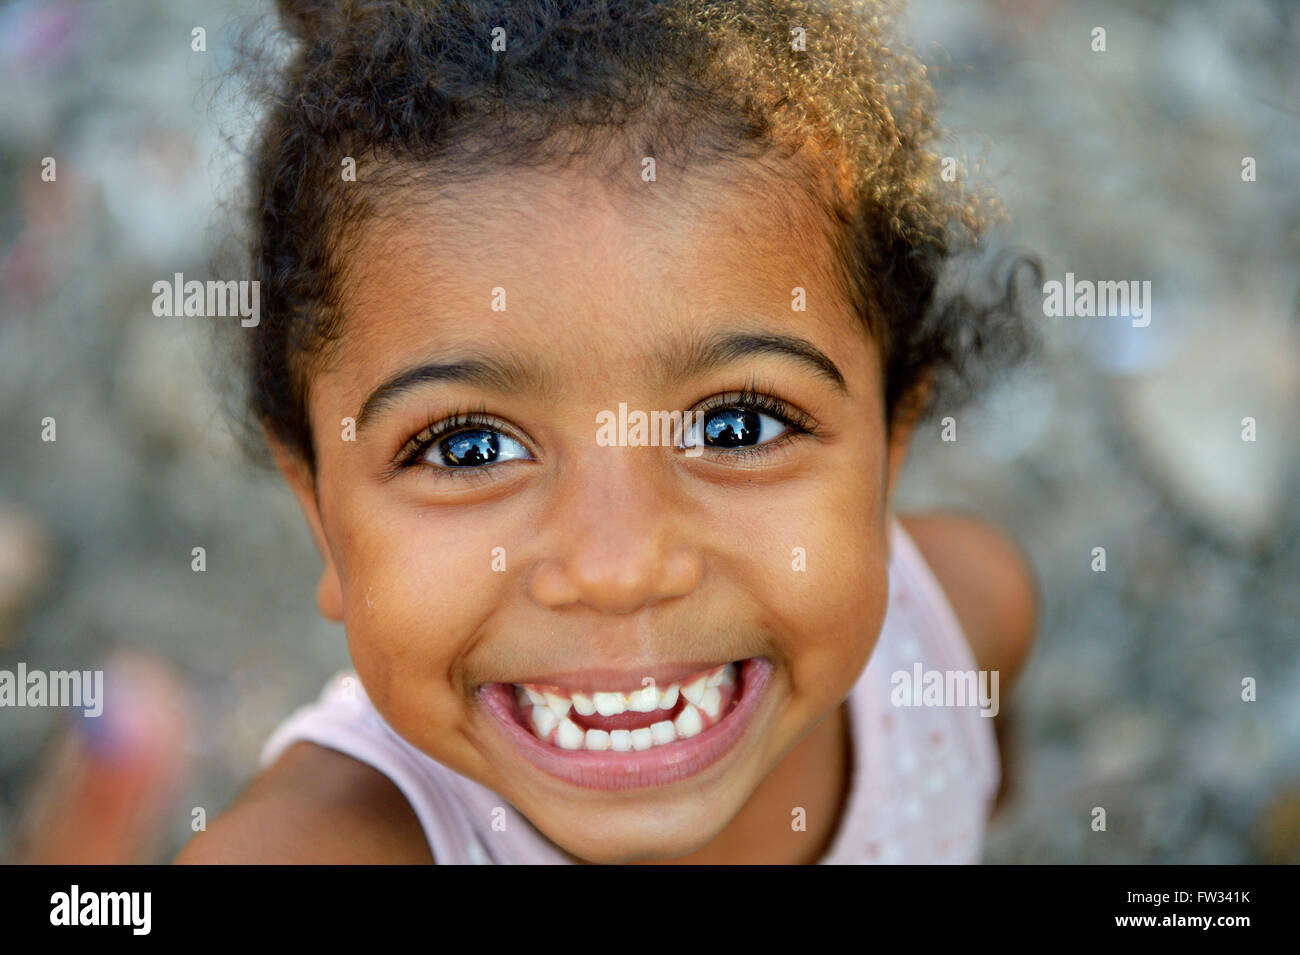 Laughing girl, 3 years, in a favela, Favela 21 de Abril, São Paulo, Brazil Stock Photo